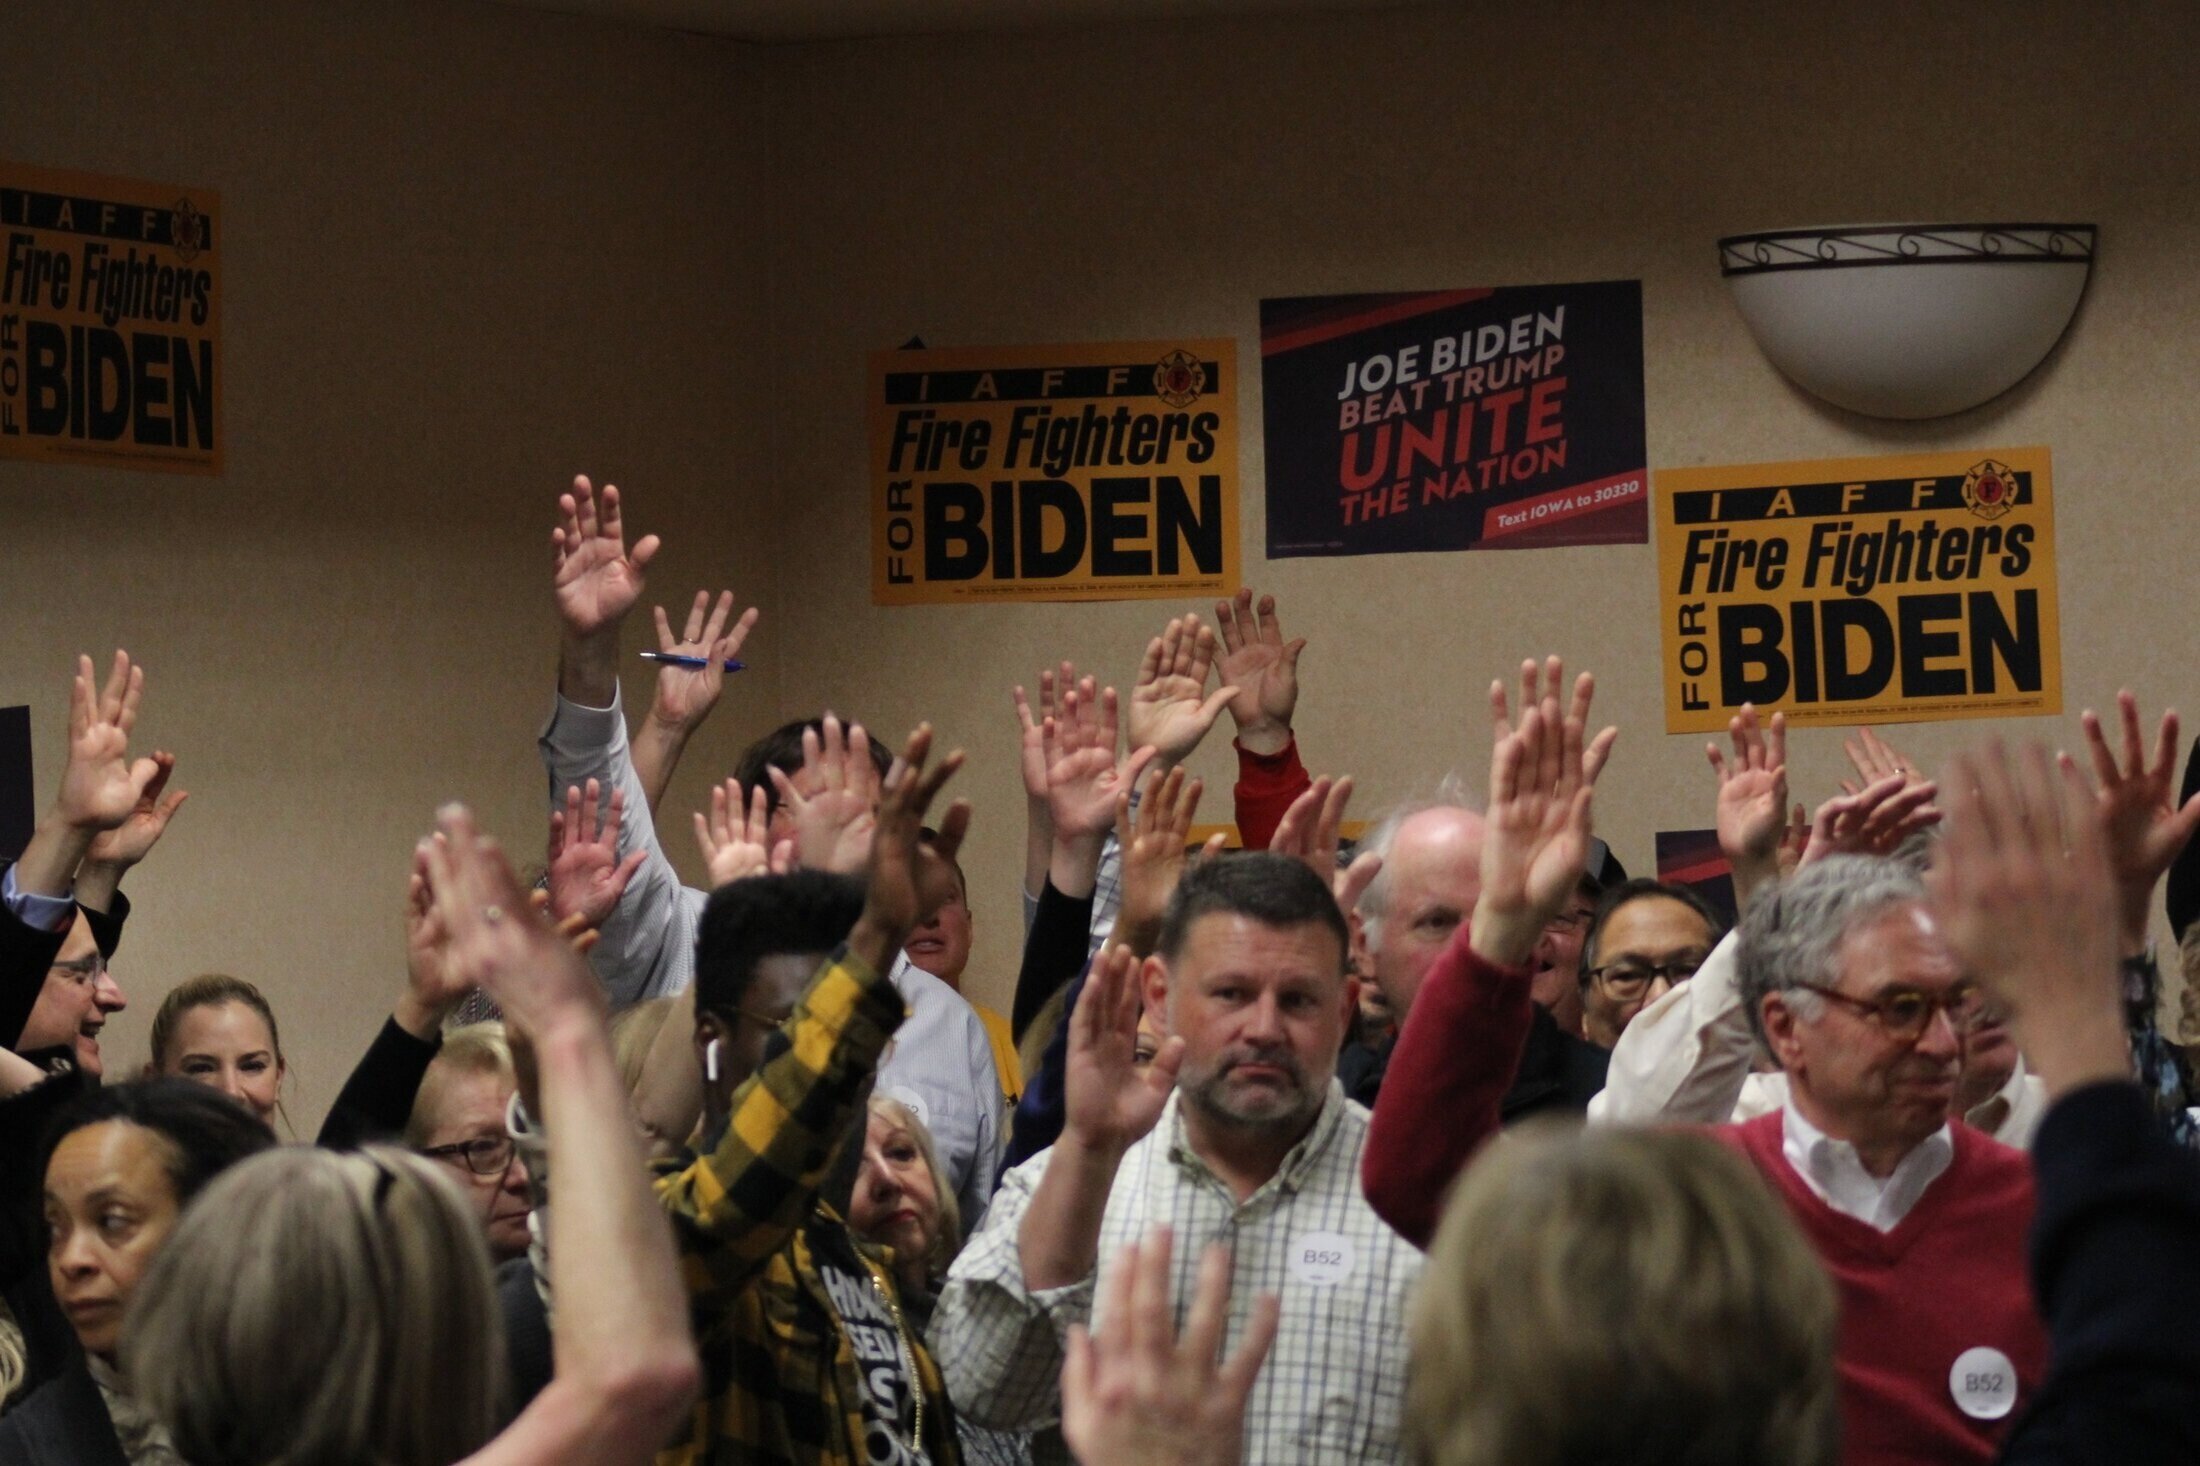 Attendants at the Iowa caucus in Bettendorf showing early support for Biden. (Alicia Olejniczak/TKS)